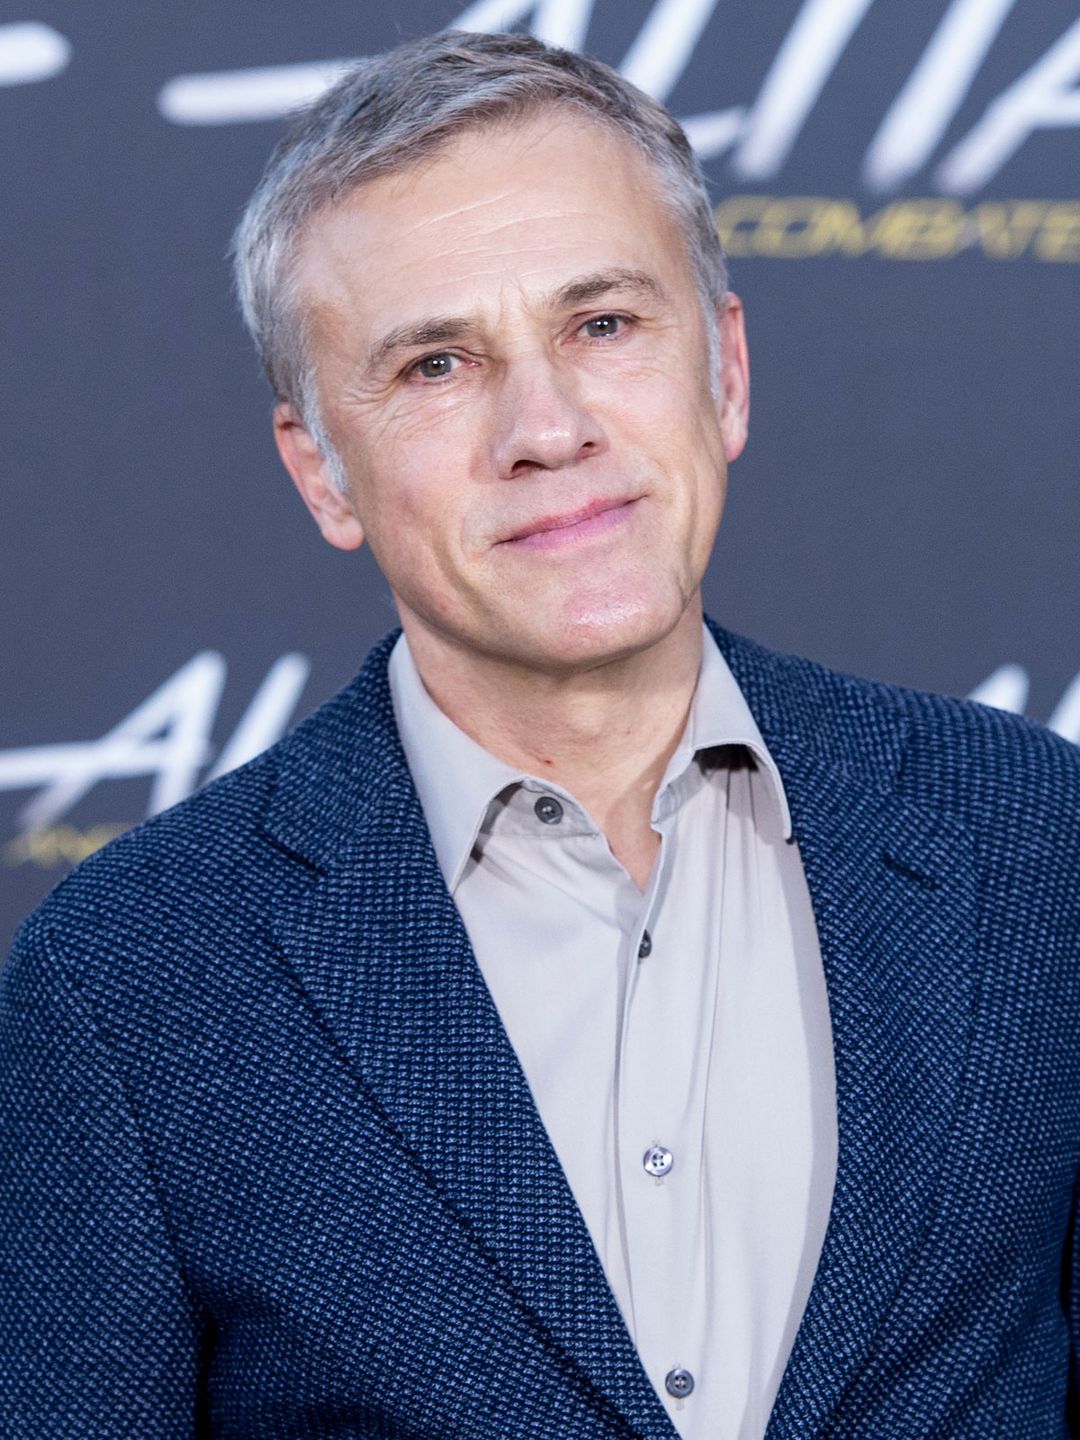 Christoph Waltz who is he